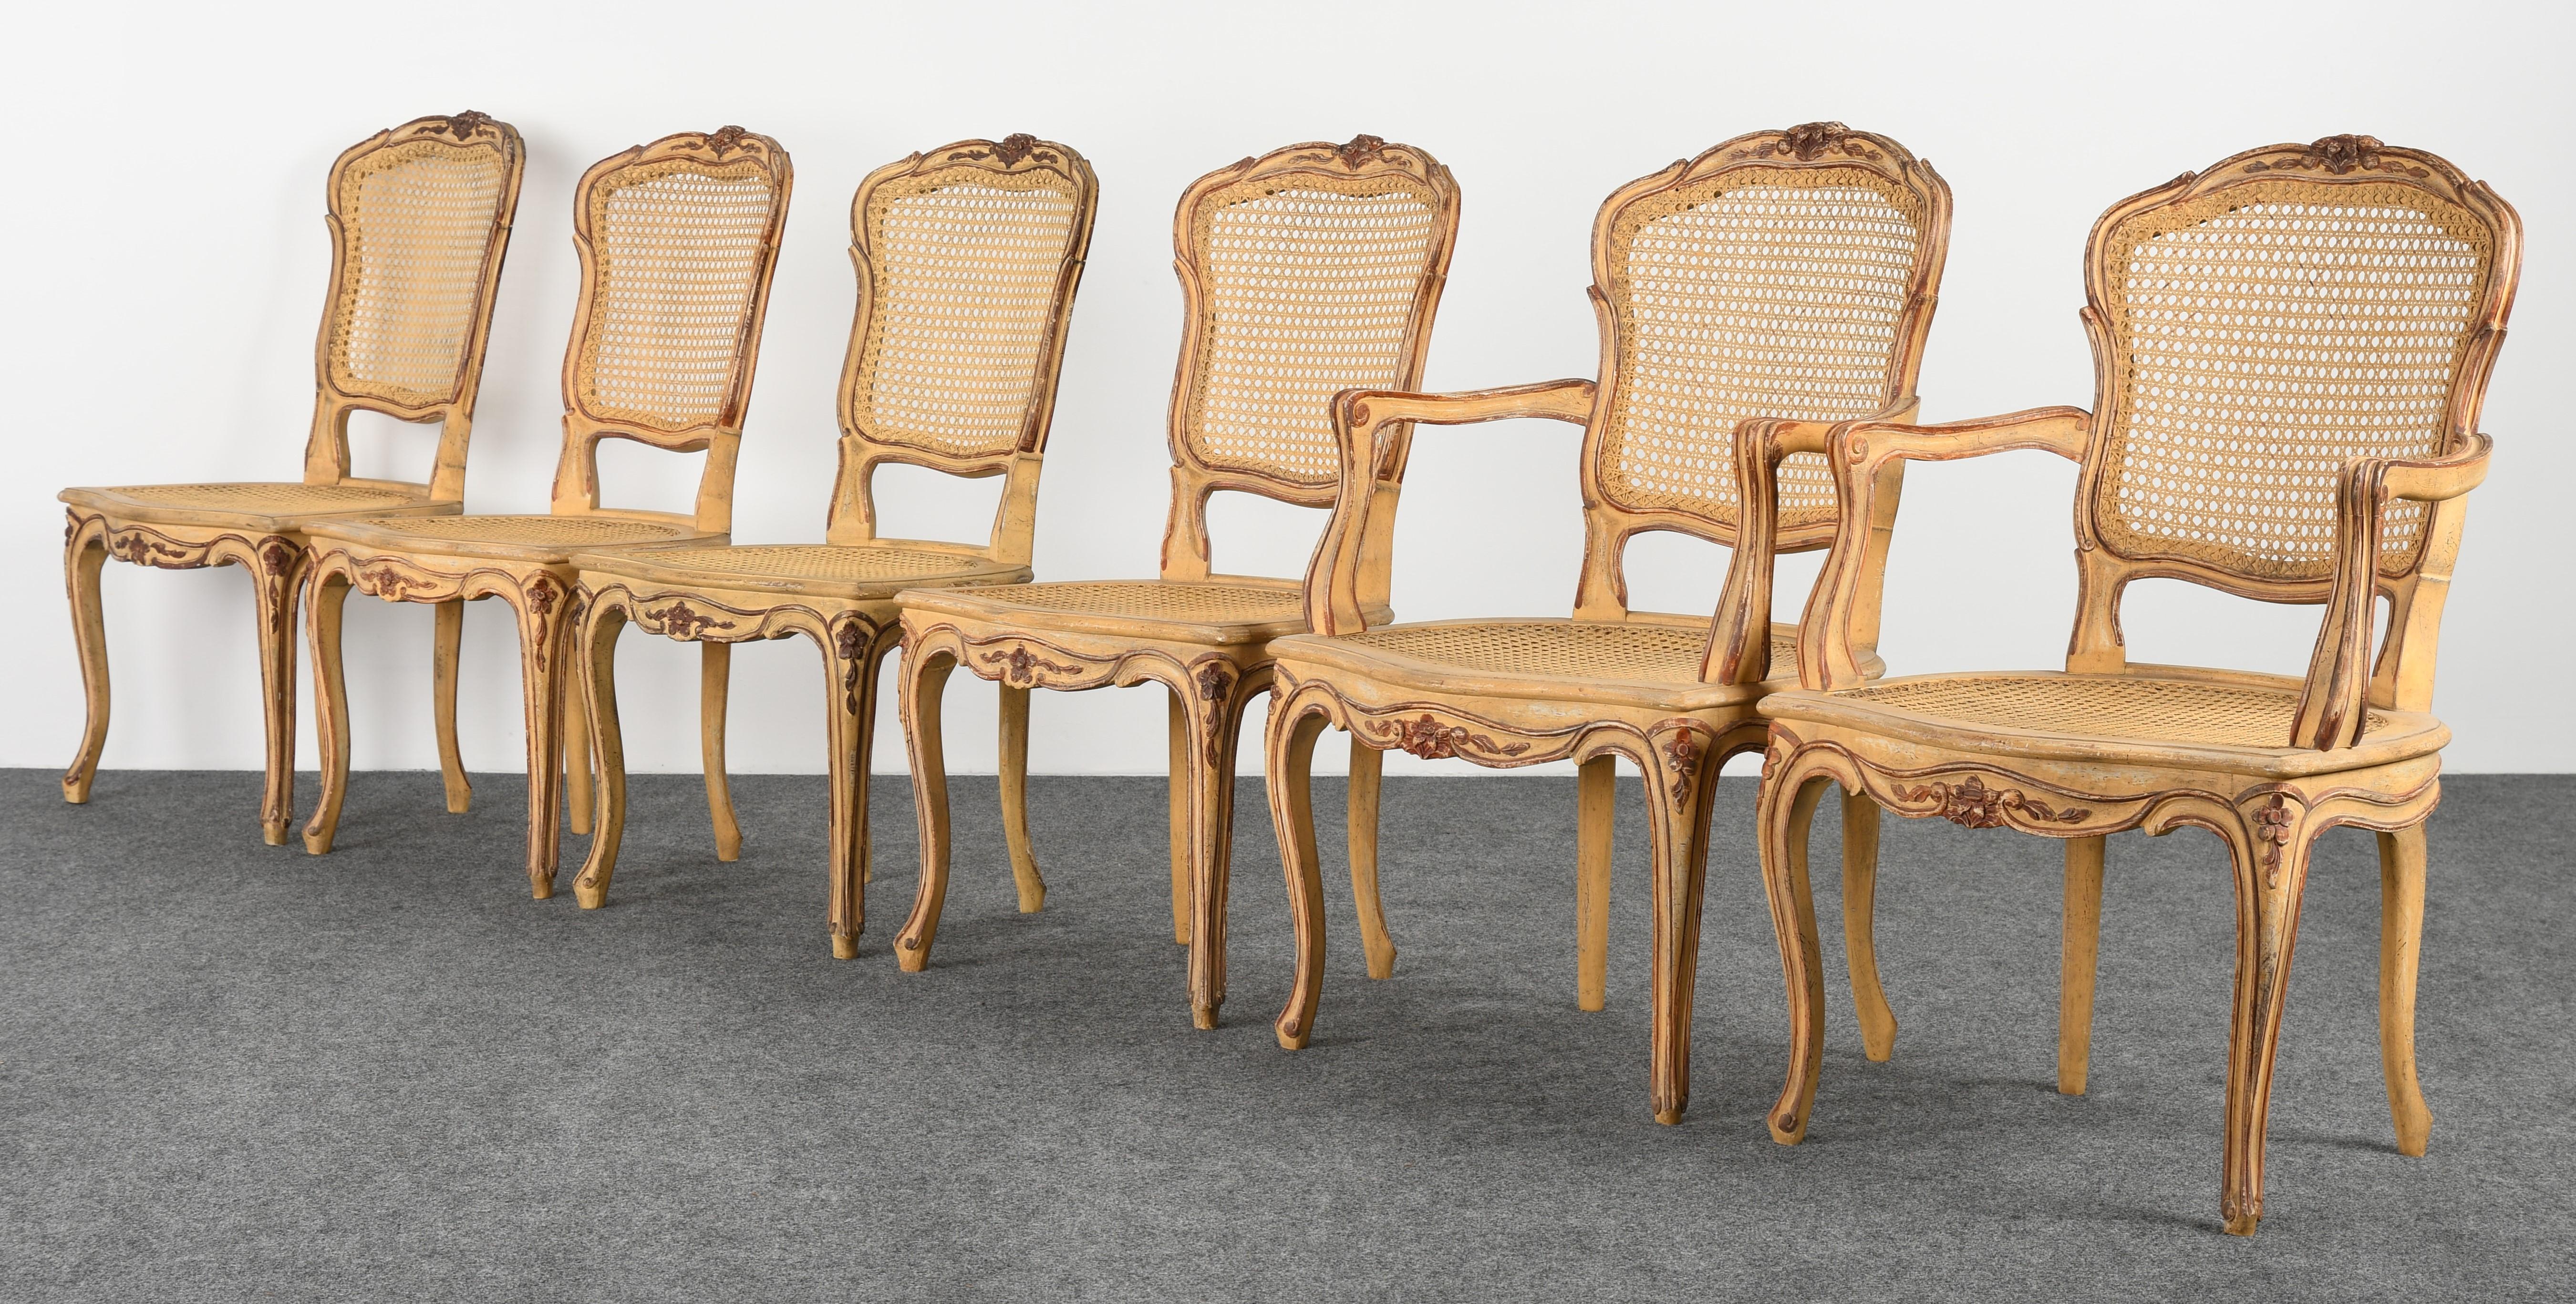 A set of six Louis XV French dining chairs with cane seats. These chairs are hand carved and hand painted yellow ocher and Venetian red. The cane seats are in very good condition. The painted finish is in very good condition with age appropriate